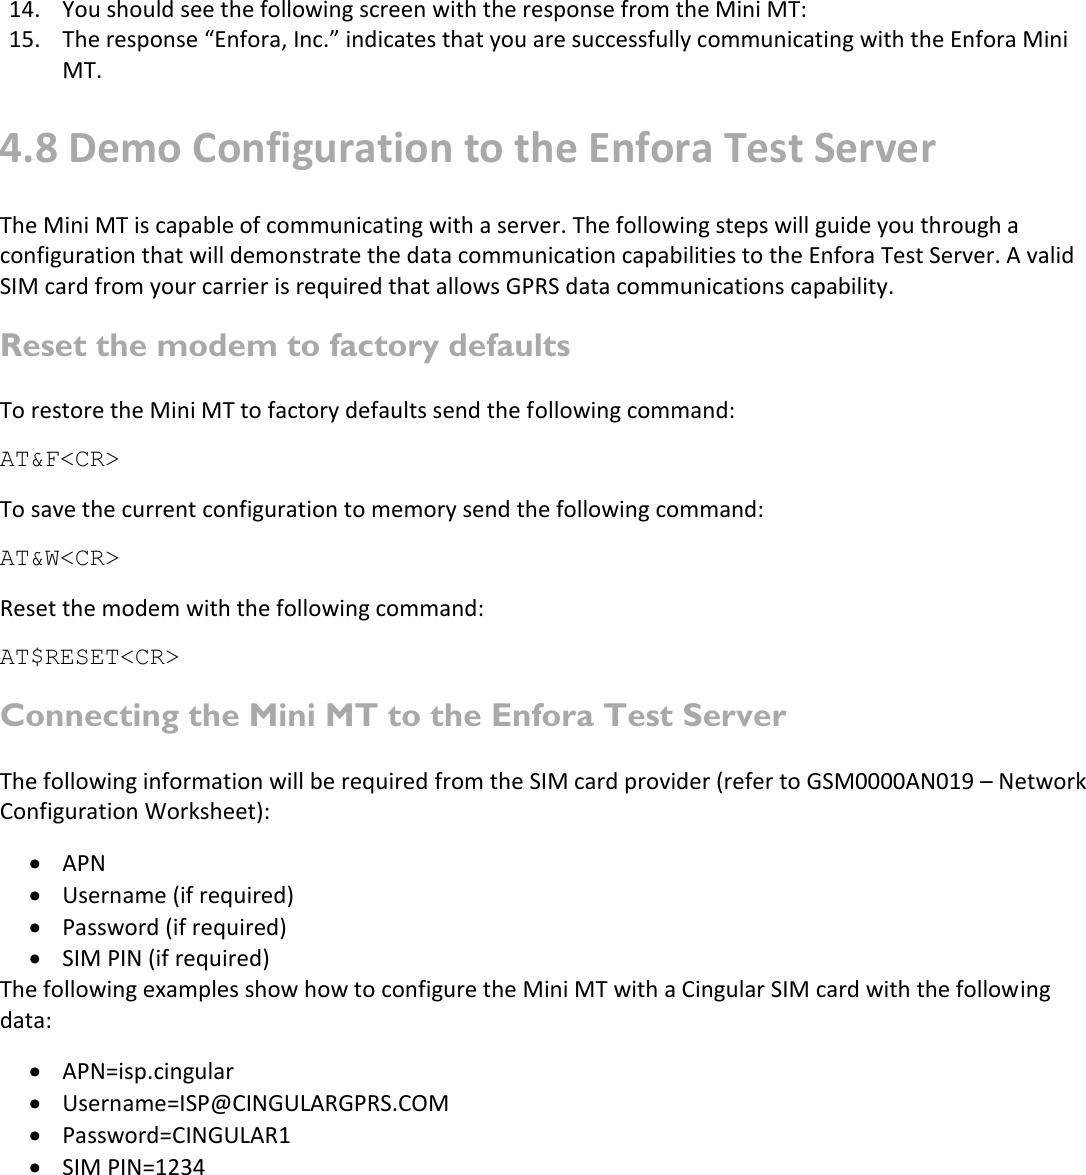   14. You should see the following screen with the response from the Mini MT: 15. The response “Enfora, Inc.” indicates that you are successfully communicating with the Enfora Mini MT. 4.8 Demo Configuration to the Enfora Test Server The Mini MT is capable of communicating with a server. The following steps will guide you through a configuration that will demonstrate the data communication capabilities to the Enfora Test Server. A valid SIM card from your carrier is required that allows GPRS data communications capability. Reset the modem to factory defaults To restore the Mini MT to factory defaults send the following command: AT&amp;F&lt;CR&gt; To save the current configuration to memory send the following command: AT&amp;W&lt;CR&gt; Reset the modem with the following command: AT$RESET&lt;CR&gt; Connecting the Mini MT to the Enfora Test Server The following information will be required from the SIM card provider (refer to GSM0000AN019 – Network Configuration Worksheet):  APN  Username (if required)  Password (if required)  SIM PIN (if required) The following examples show how to configure the Mini MT with a Cingular SIM card with the following data:  APN=isp.cingular  Username=ISP@CINGULARGPRS.COM  Password=CINGULAR1  SIM PIN=1234   